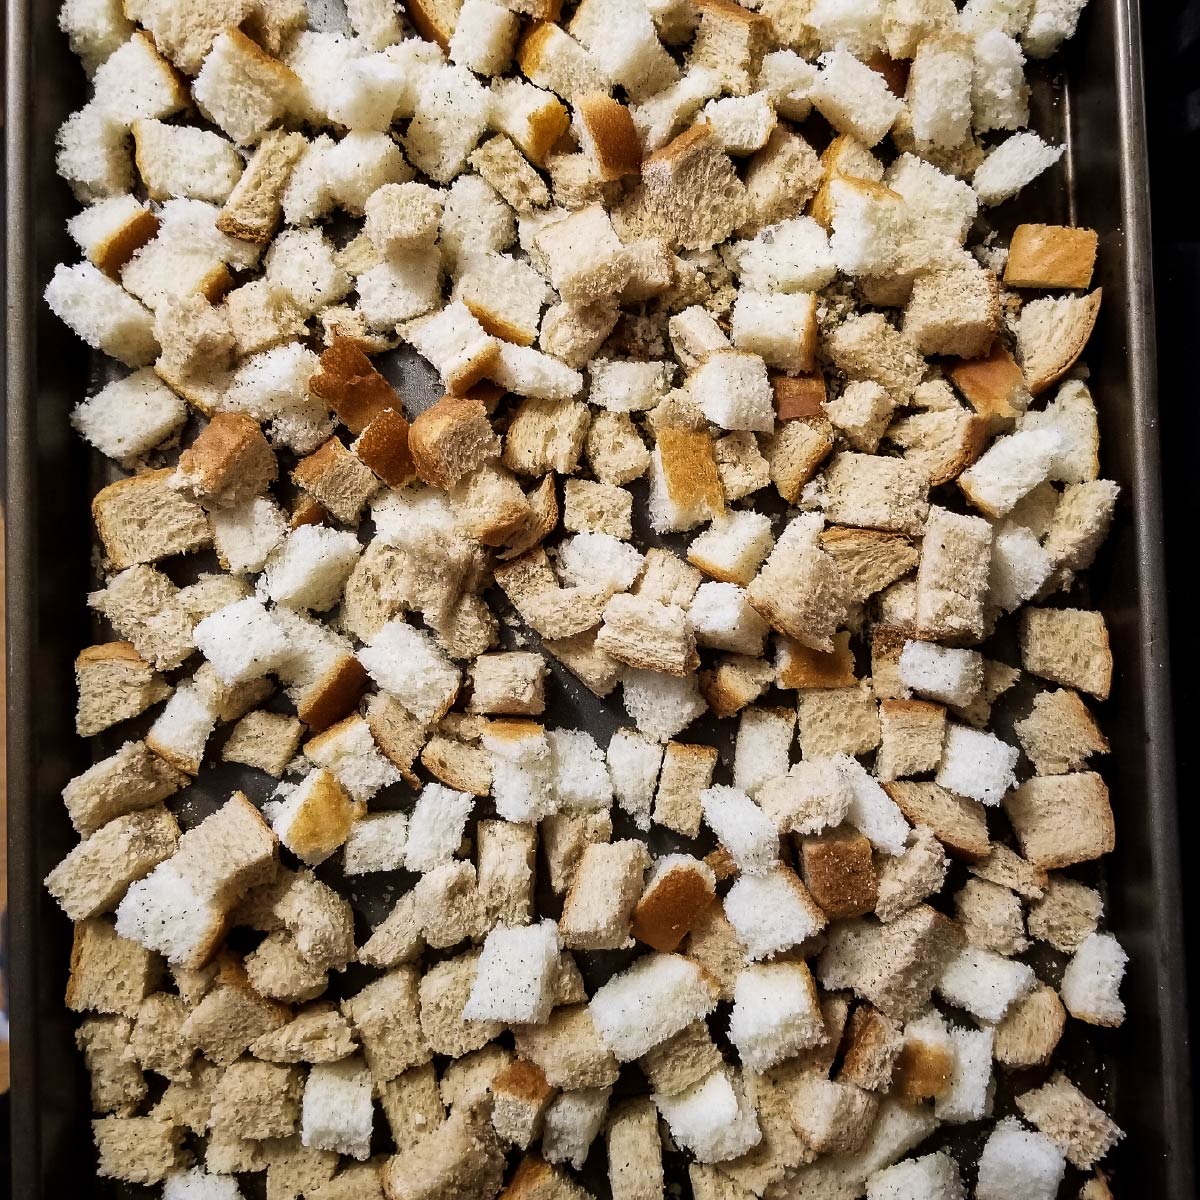 Bread cubes on a baking tray that just came out of the oven.